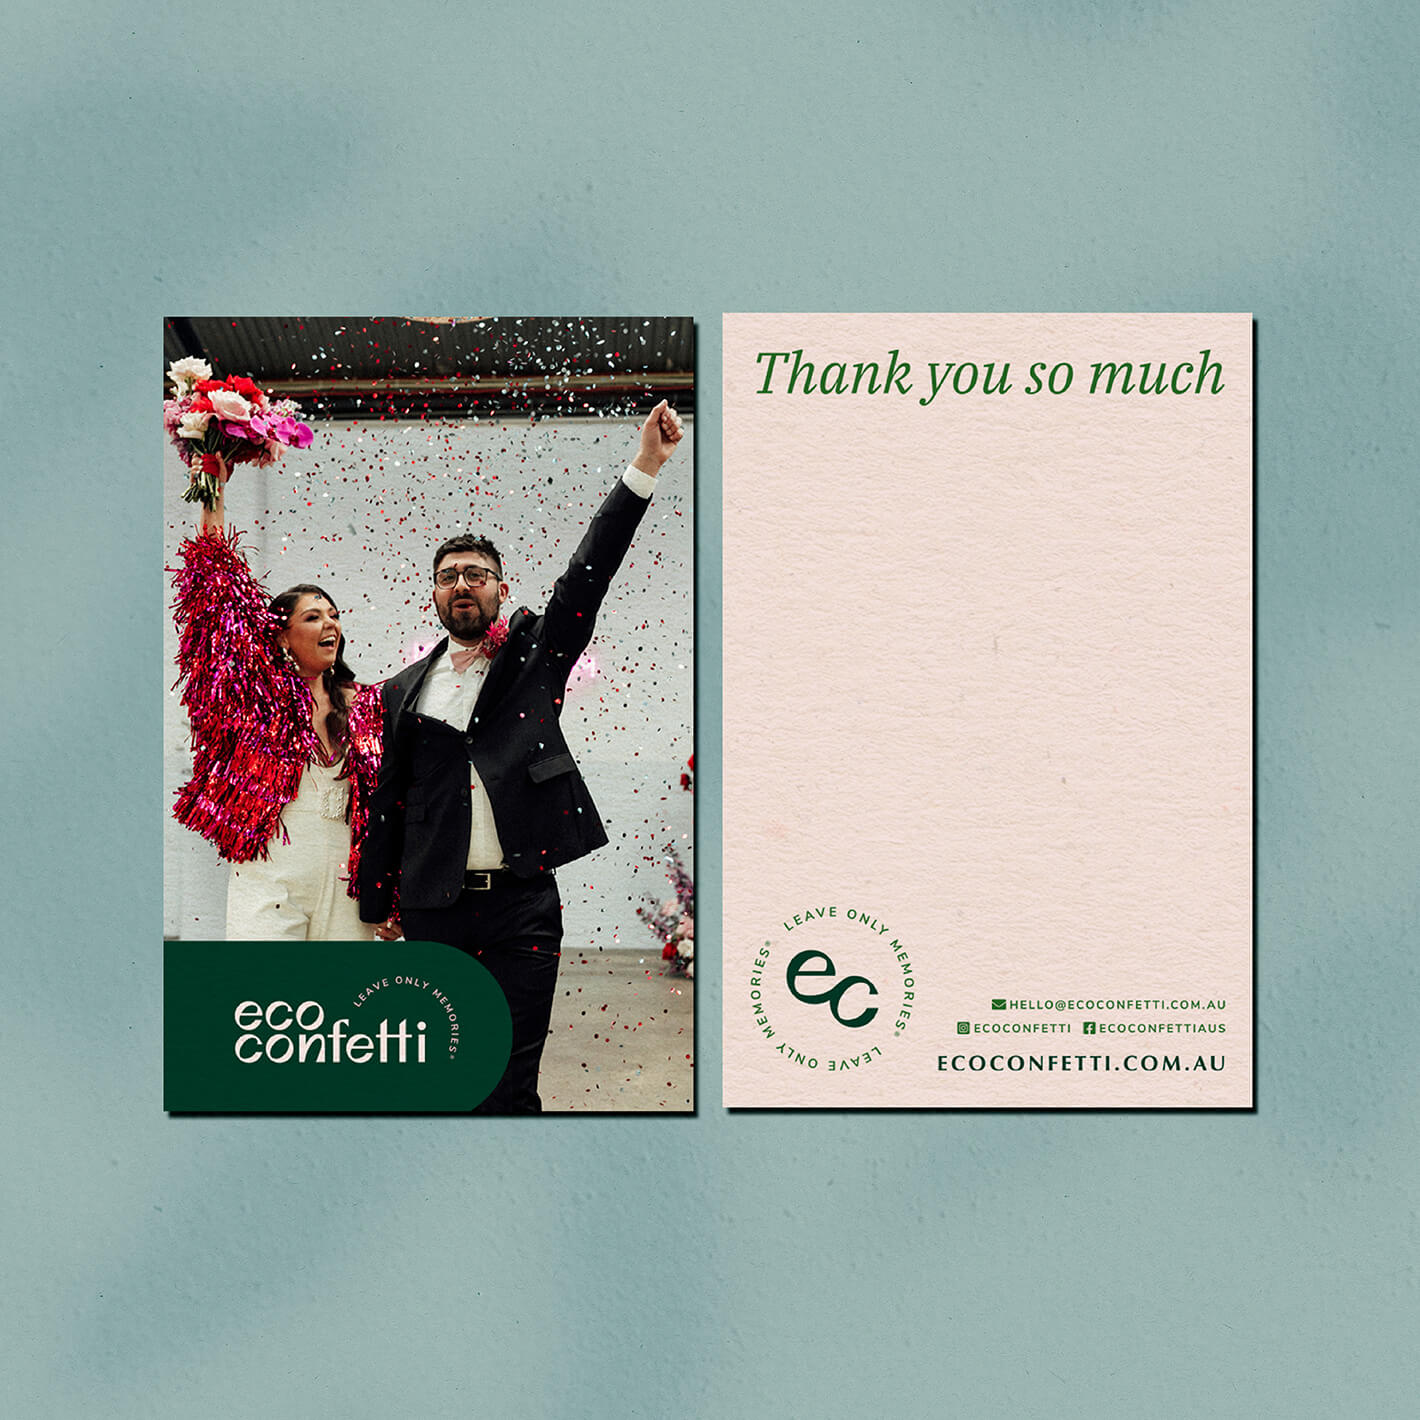 Brand design portfolio image of the Eco Confetti thank you cards. The front image features a couple and the brand logo while the back features contact information and space for a message.